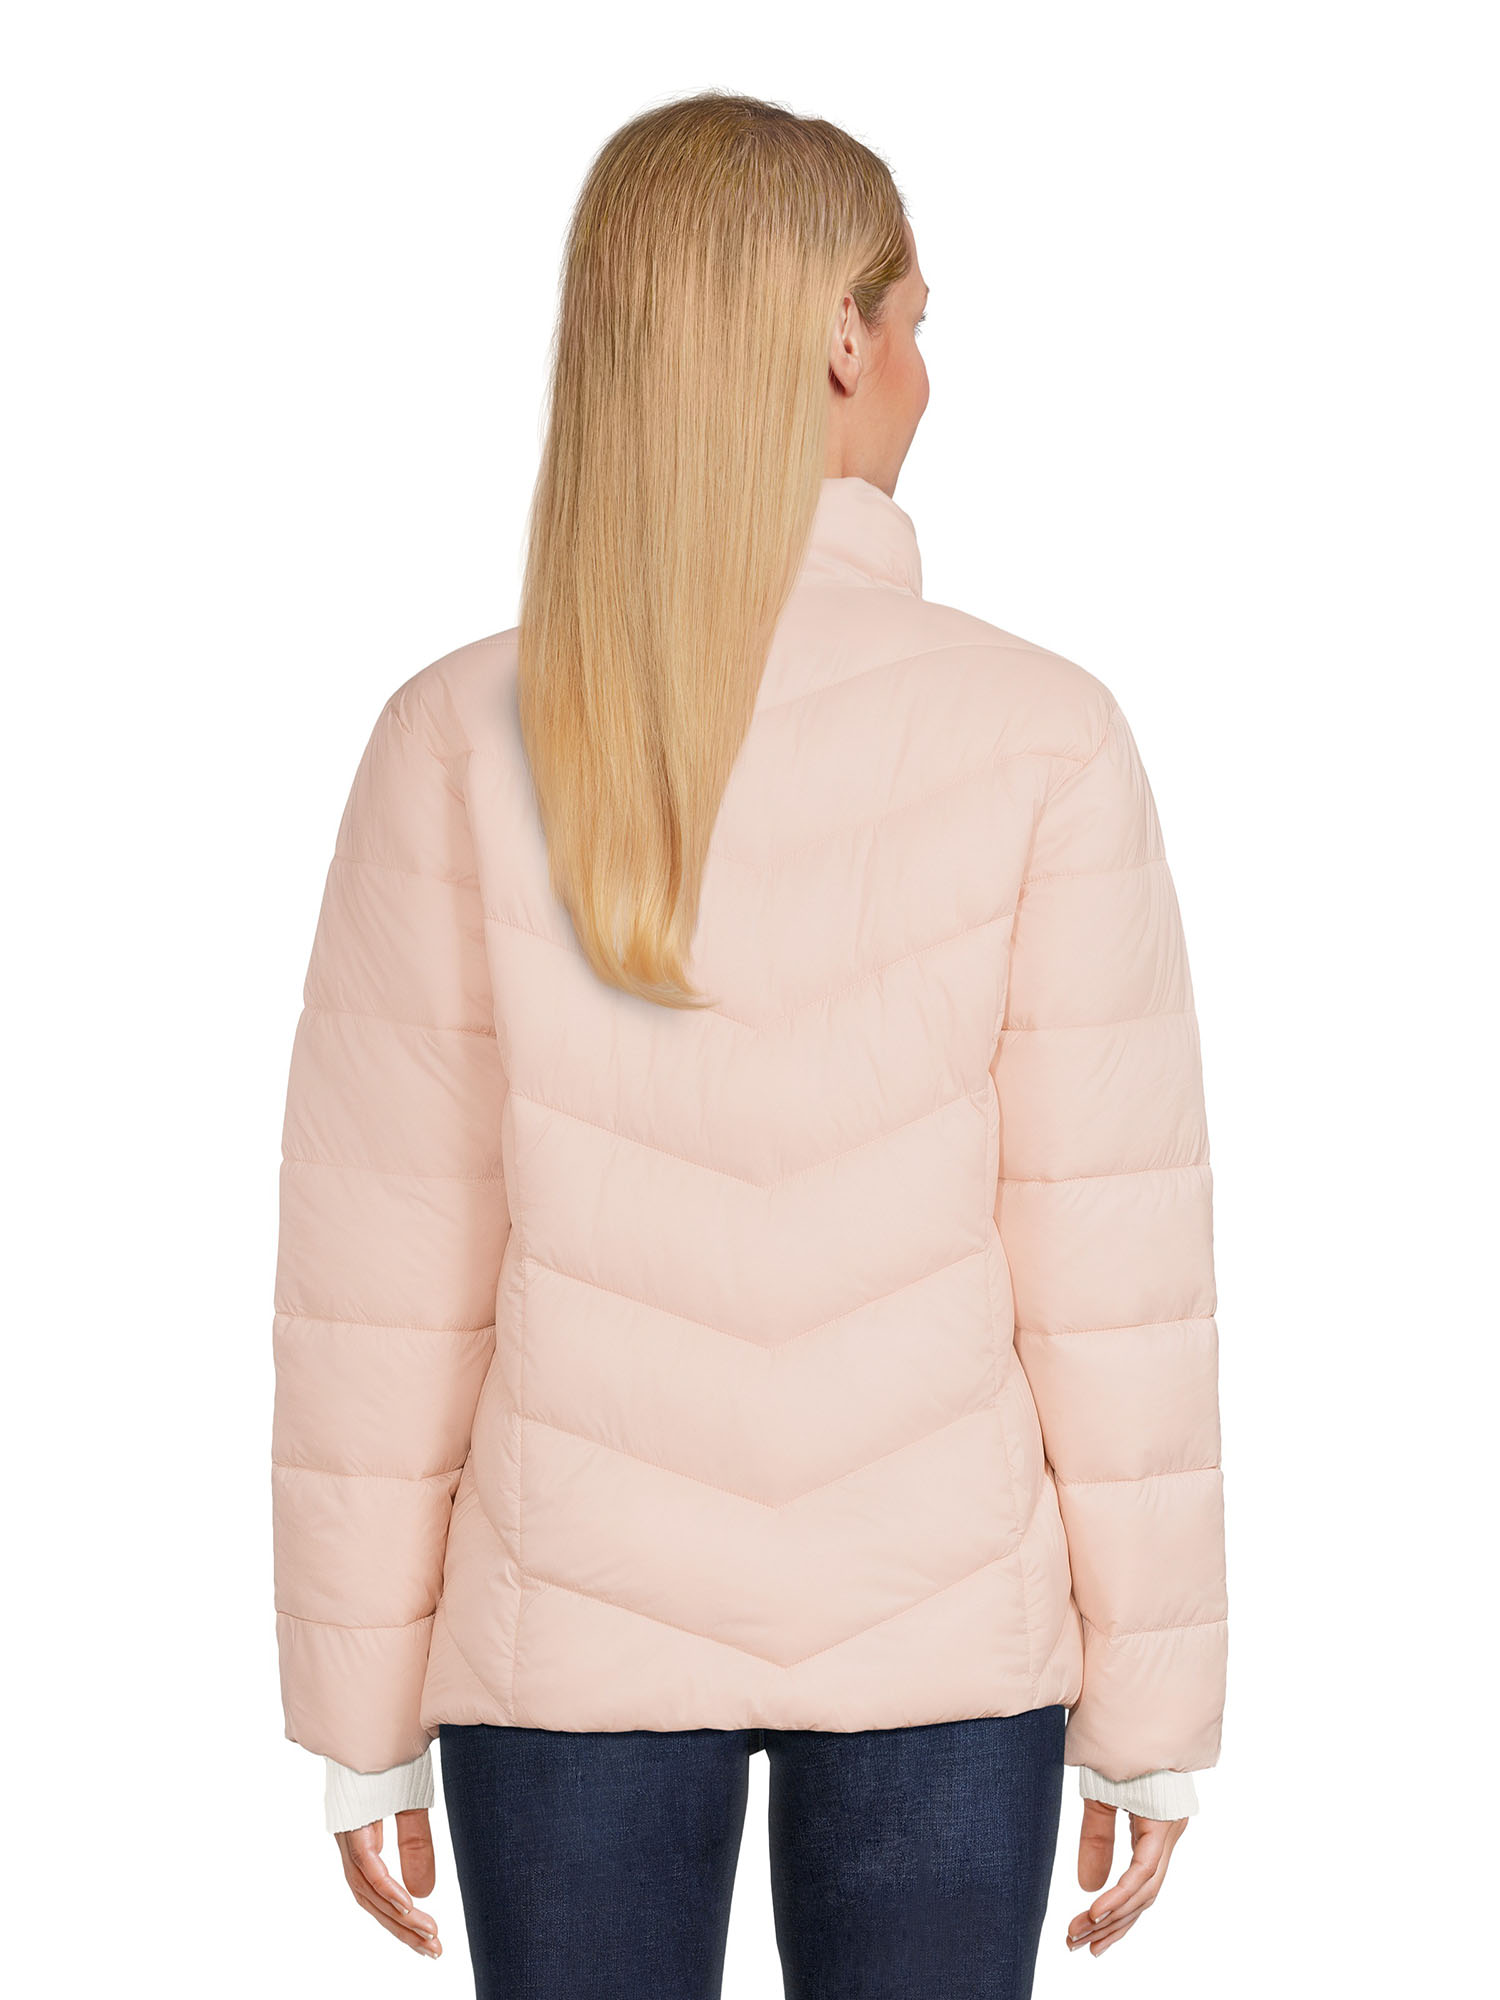 Time and Tru Women's Chevron Midweight Puffer Jacket, Sizes XS-3X - image 5 of 8